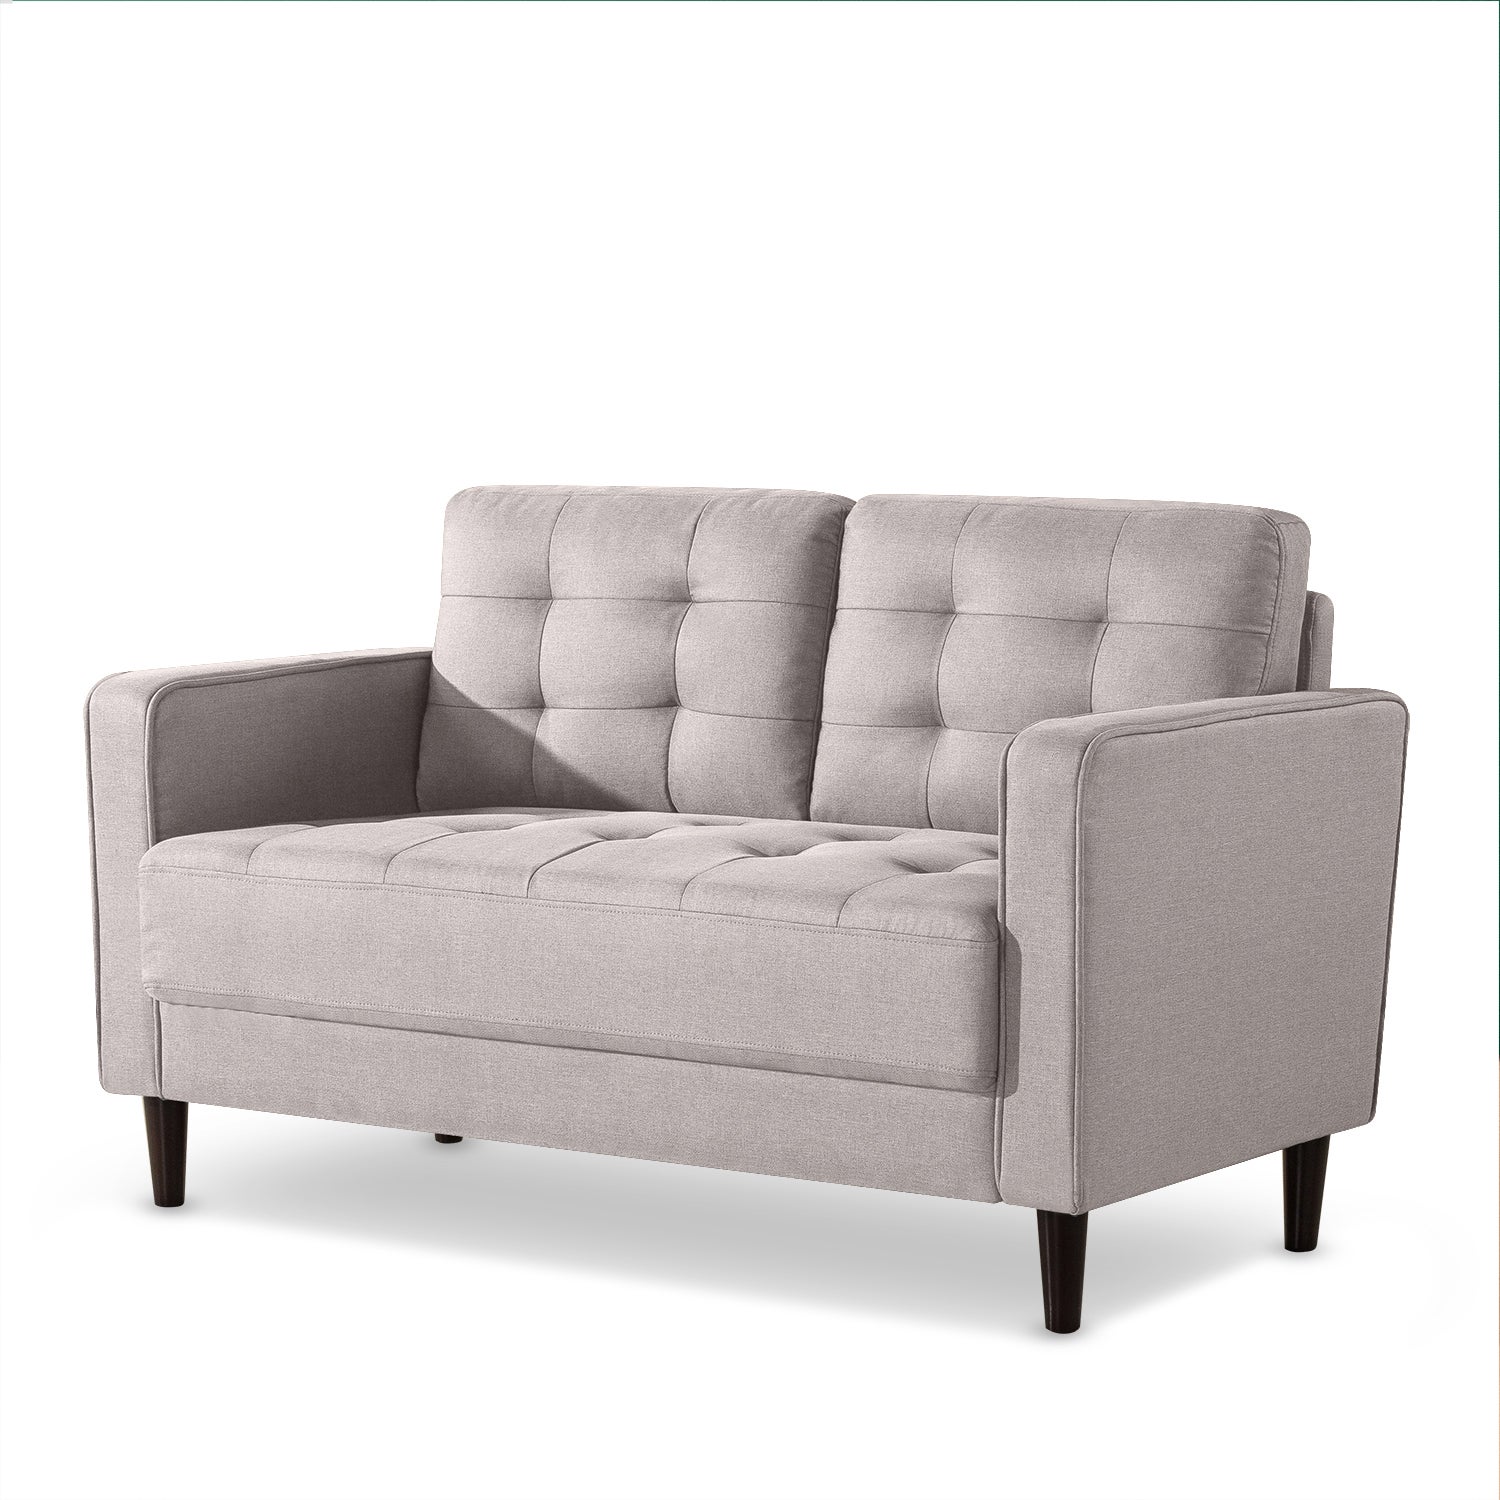 Zinus Lux Style Fabric 2 Seater Sofa Couch - Stone Grey